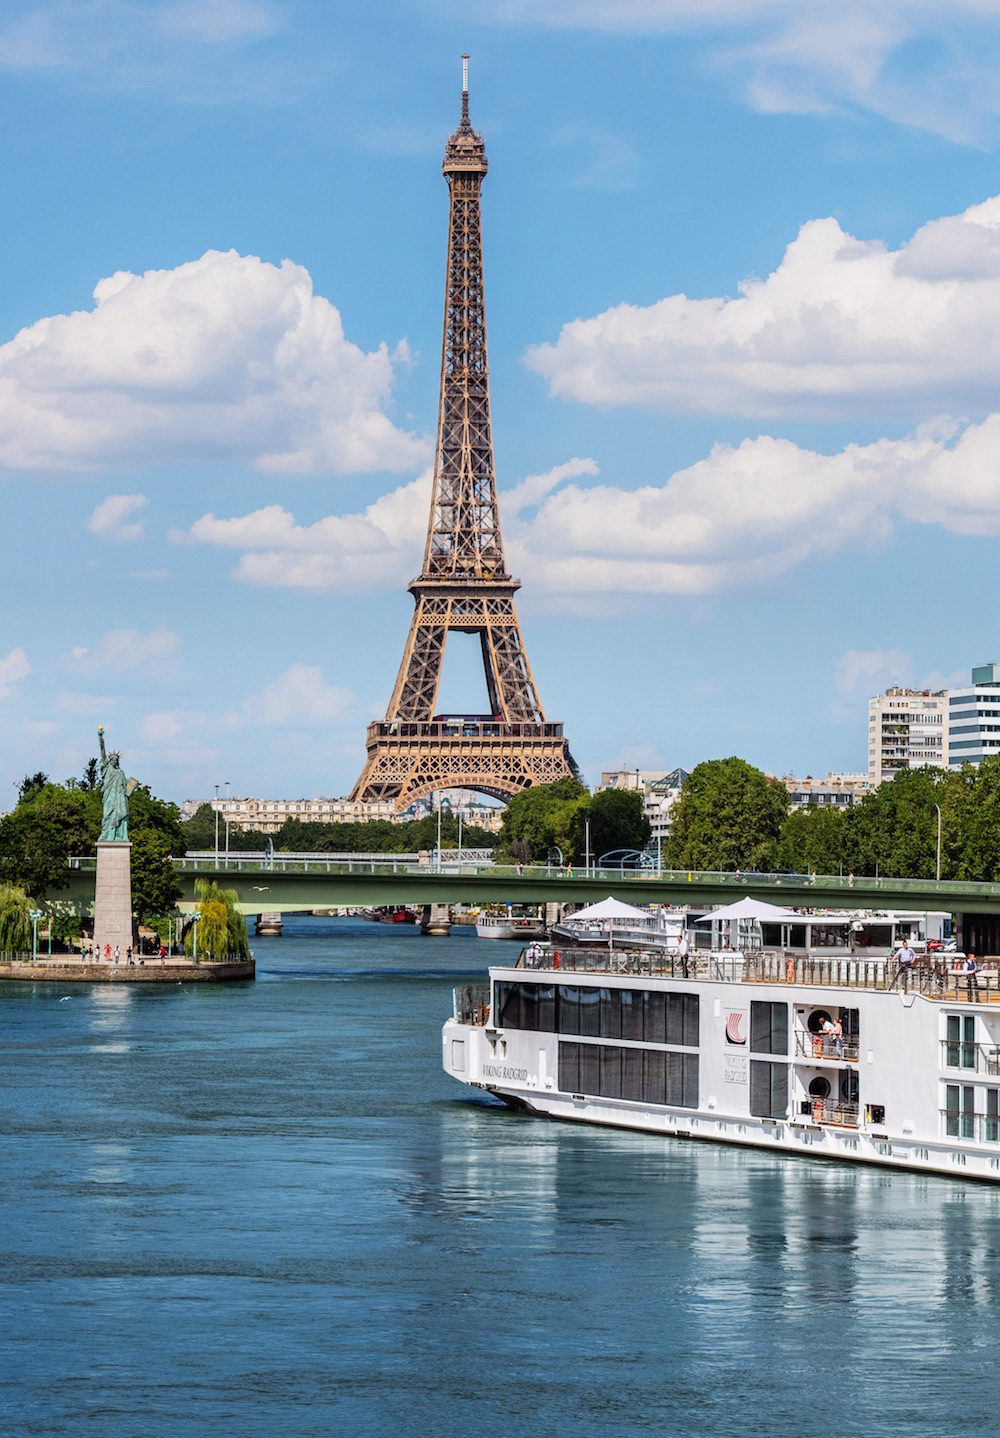 The magnificent
Eiffel Tower lies in
the distance while
cruising the Seine on
the newly launched
Viking Radgrid